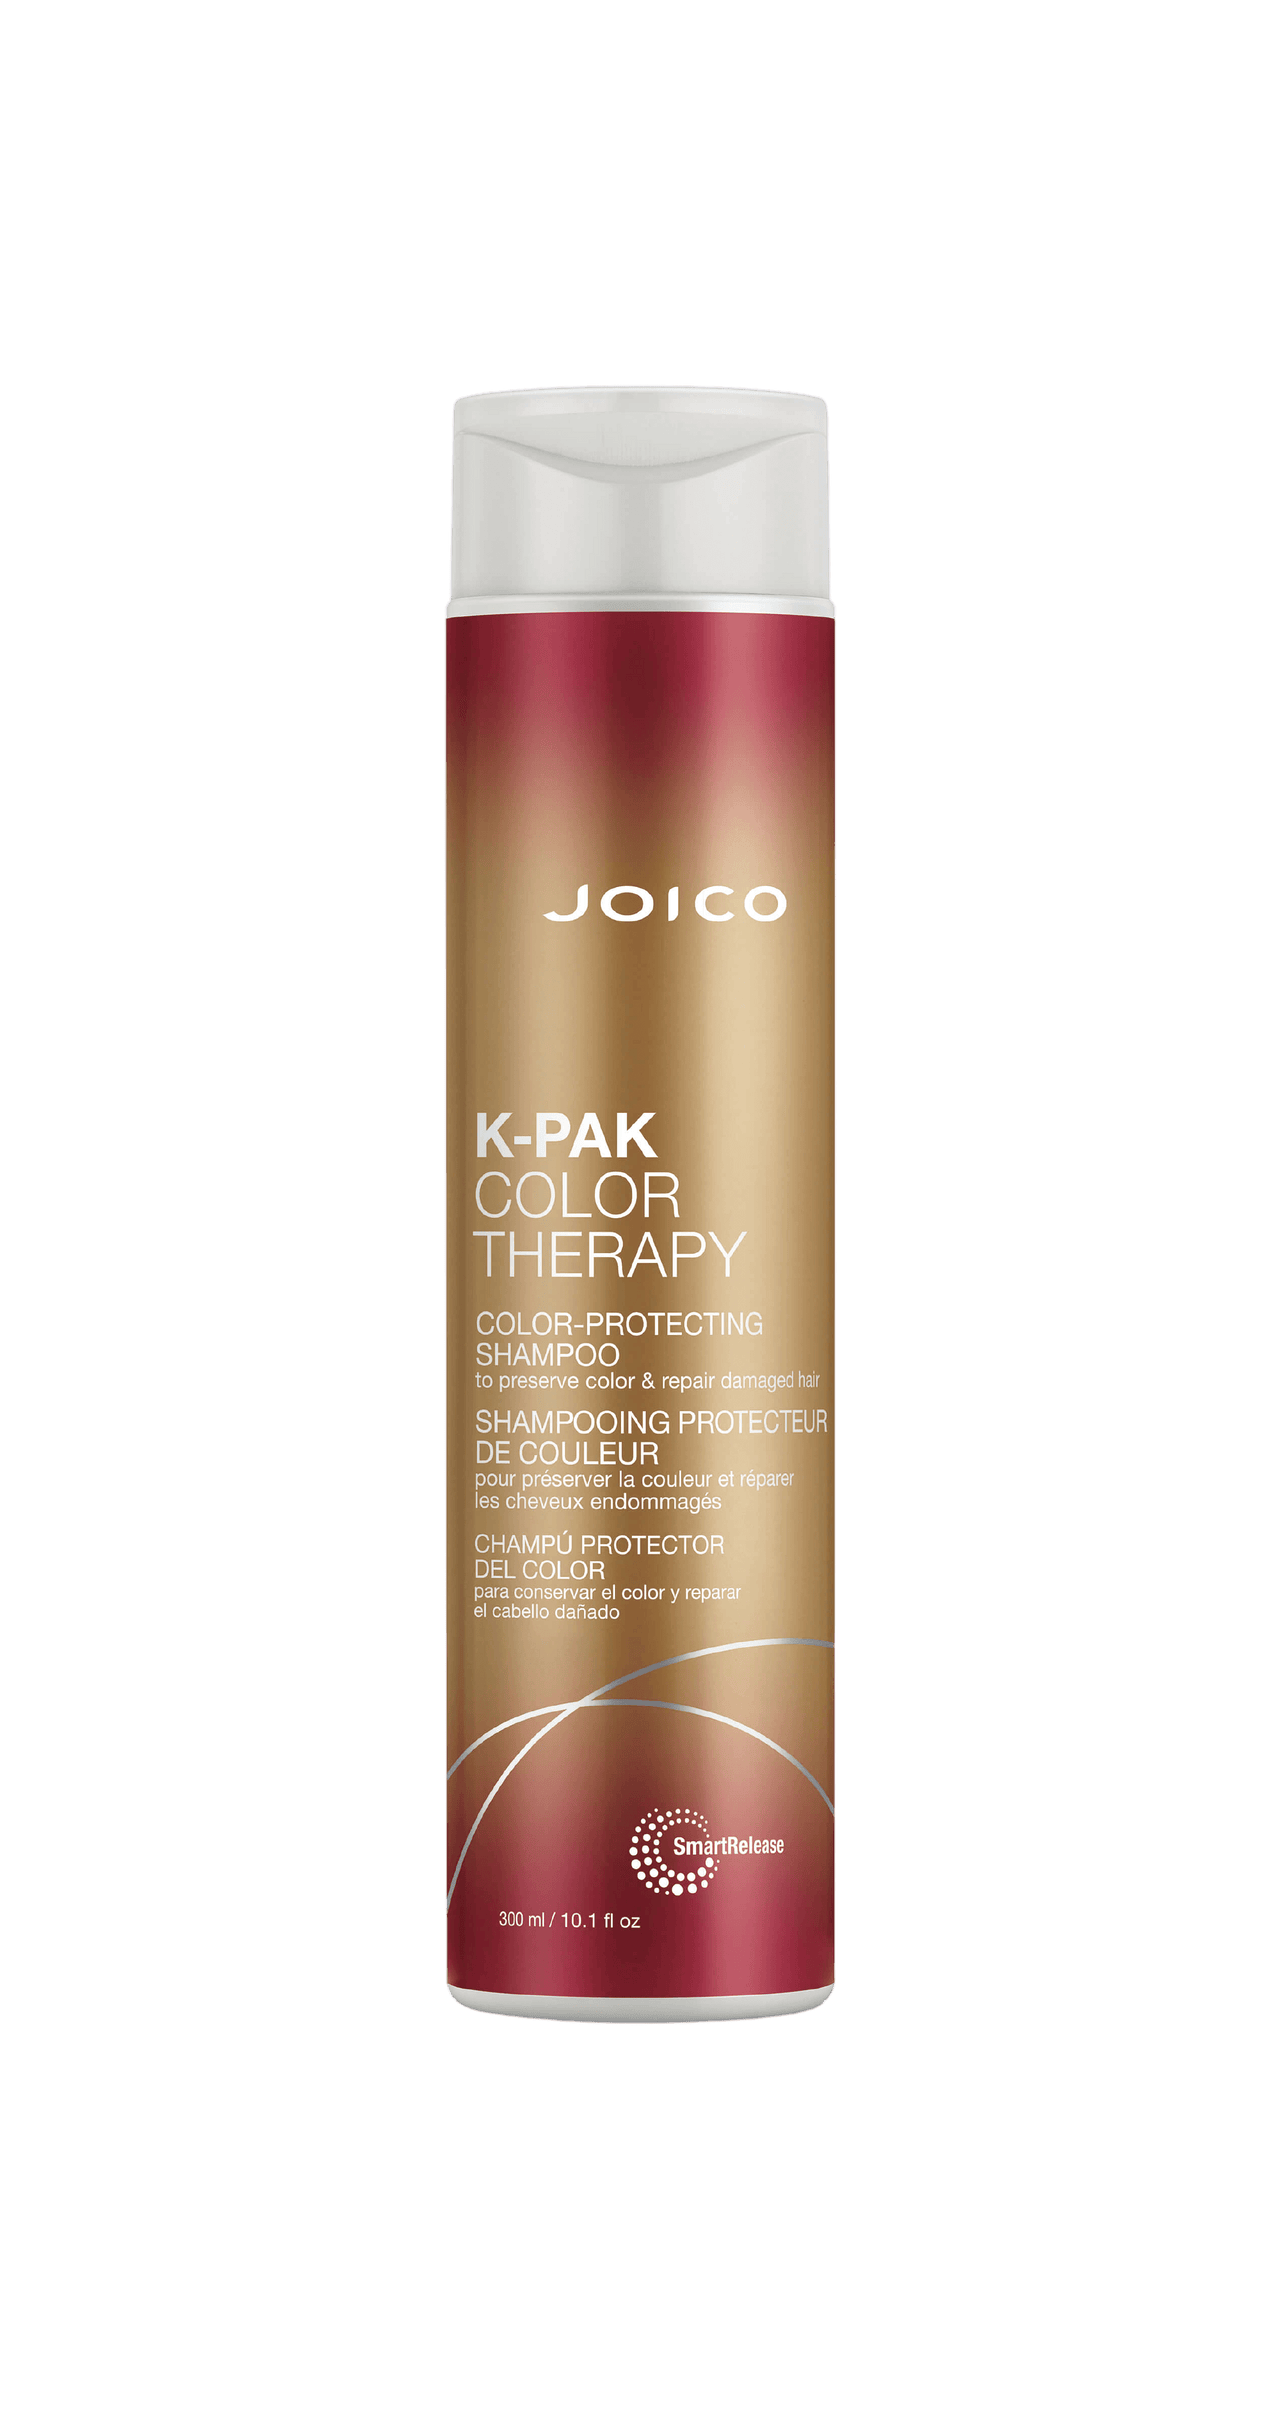 Joico  K-Pak Color Therapy Color Protecting Shampoo 300mL Bottle